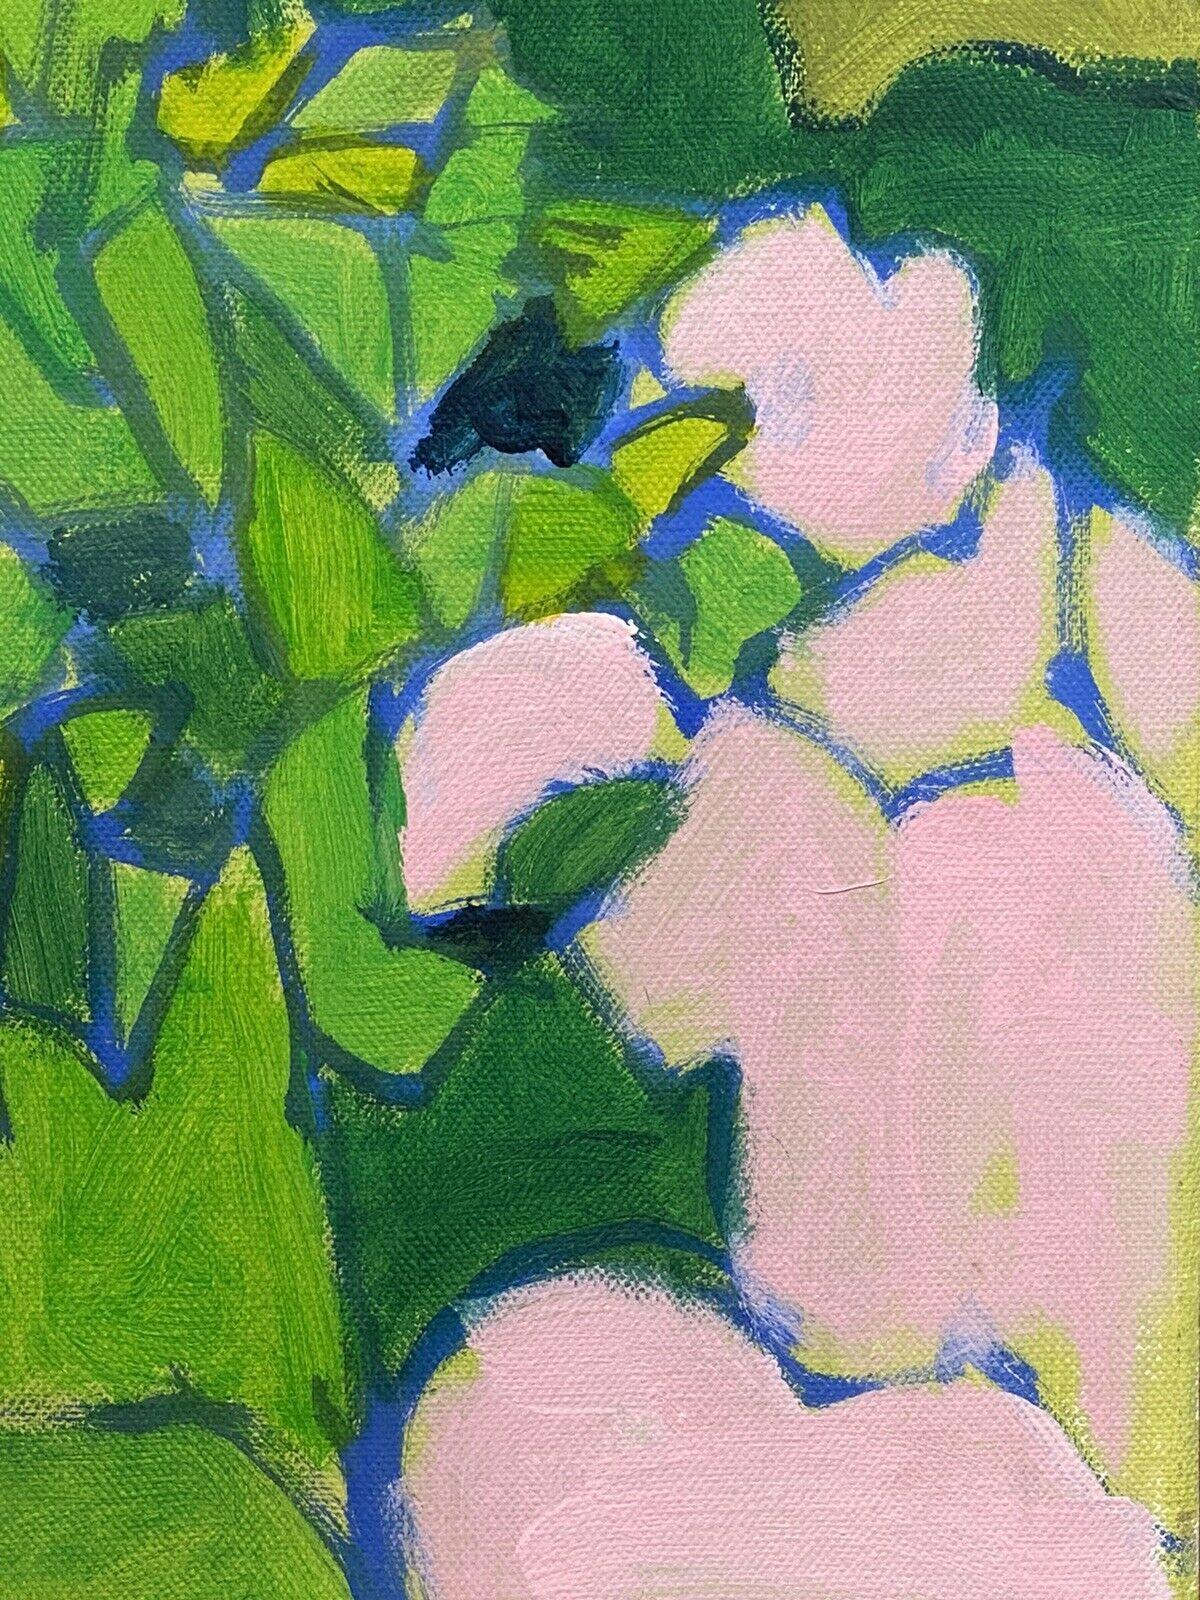 Other Leroy, French Contemporary Cubist Painting, Green Pink & Blues Landscape For Sale